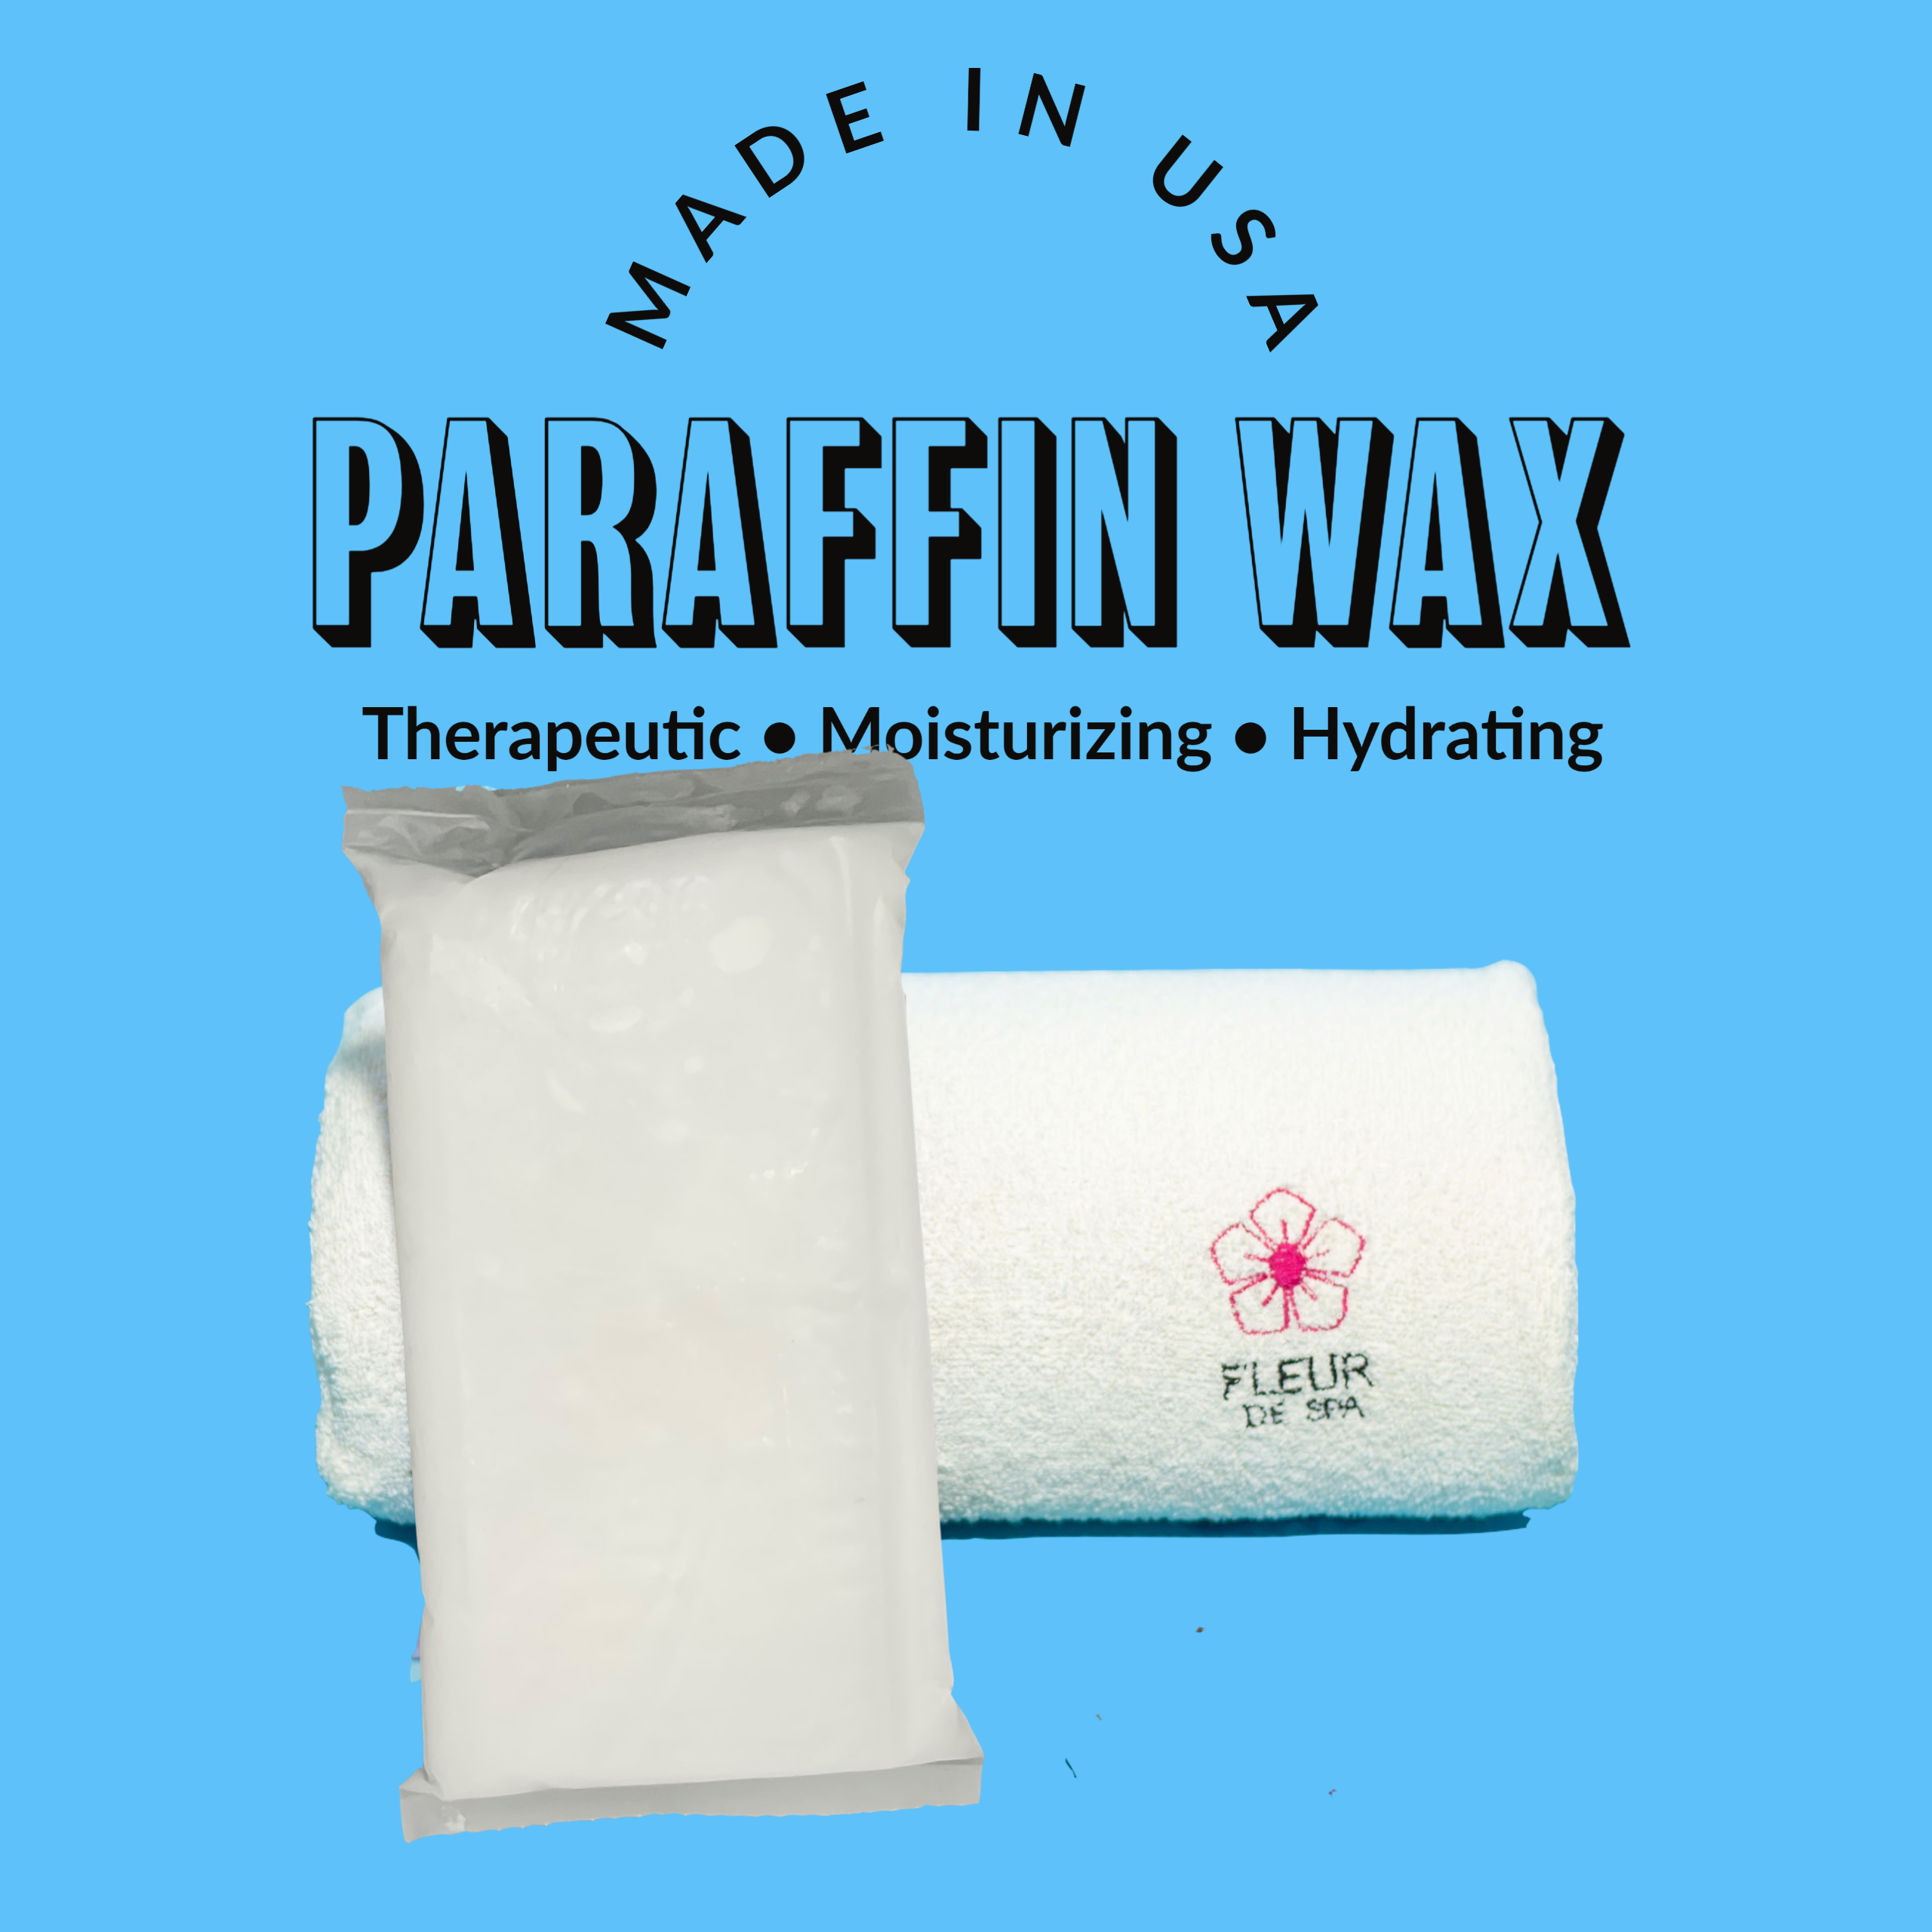 Paraffin Wax Refill from Fleur De Spa - USA made Paraffin for hands and  feet.